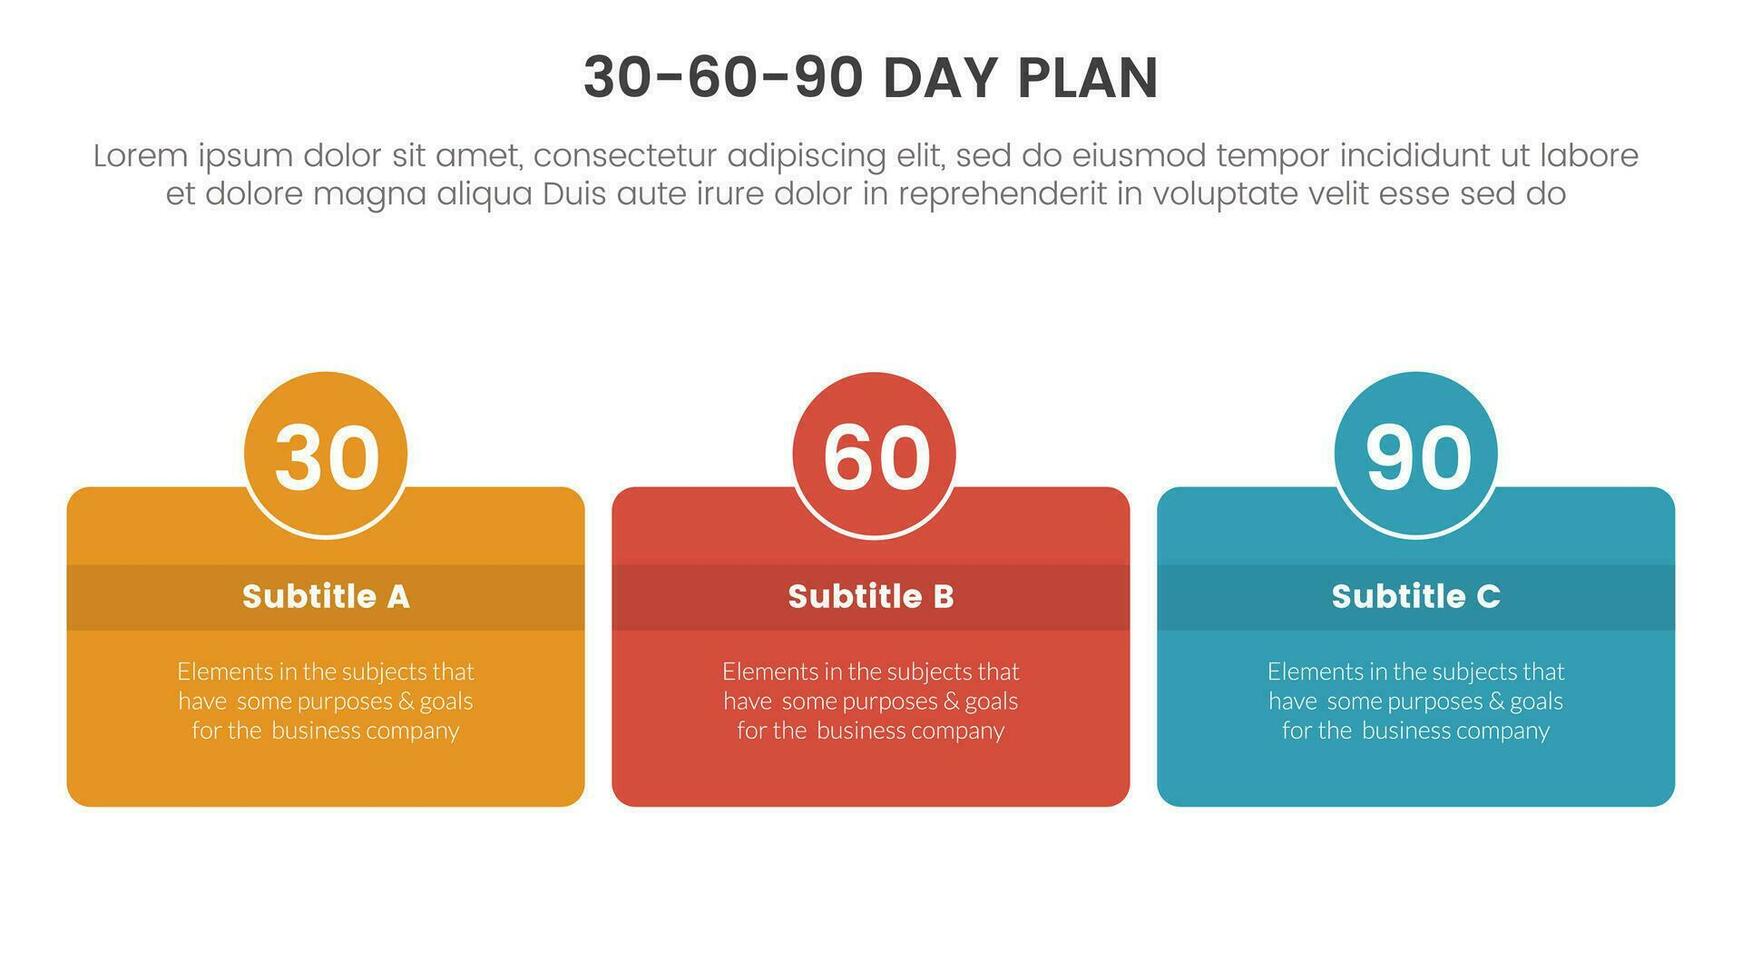 30-60-90 day plan management infographic 3 point stage template with box and circle badge horizontal concept for slide presentation vector